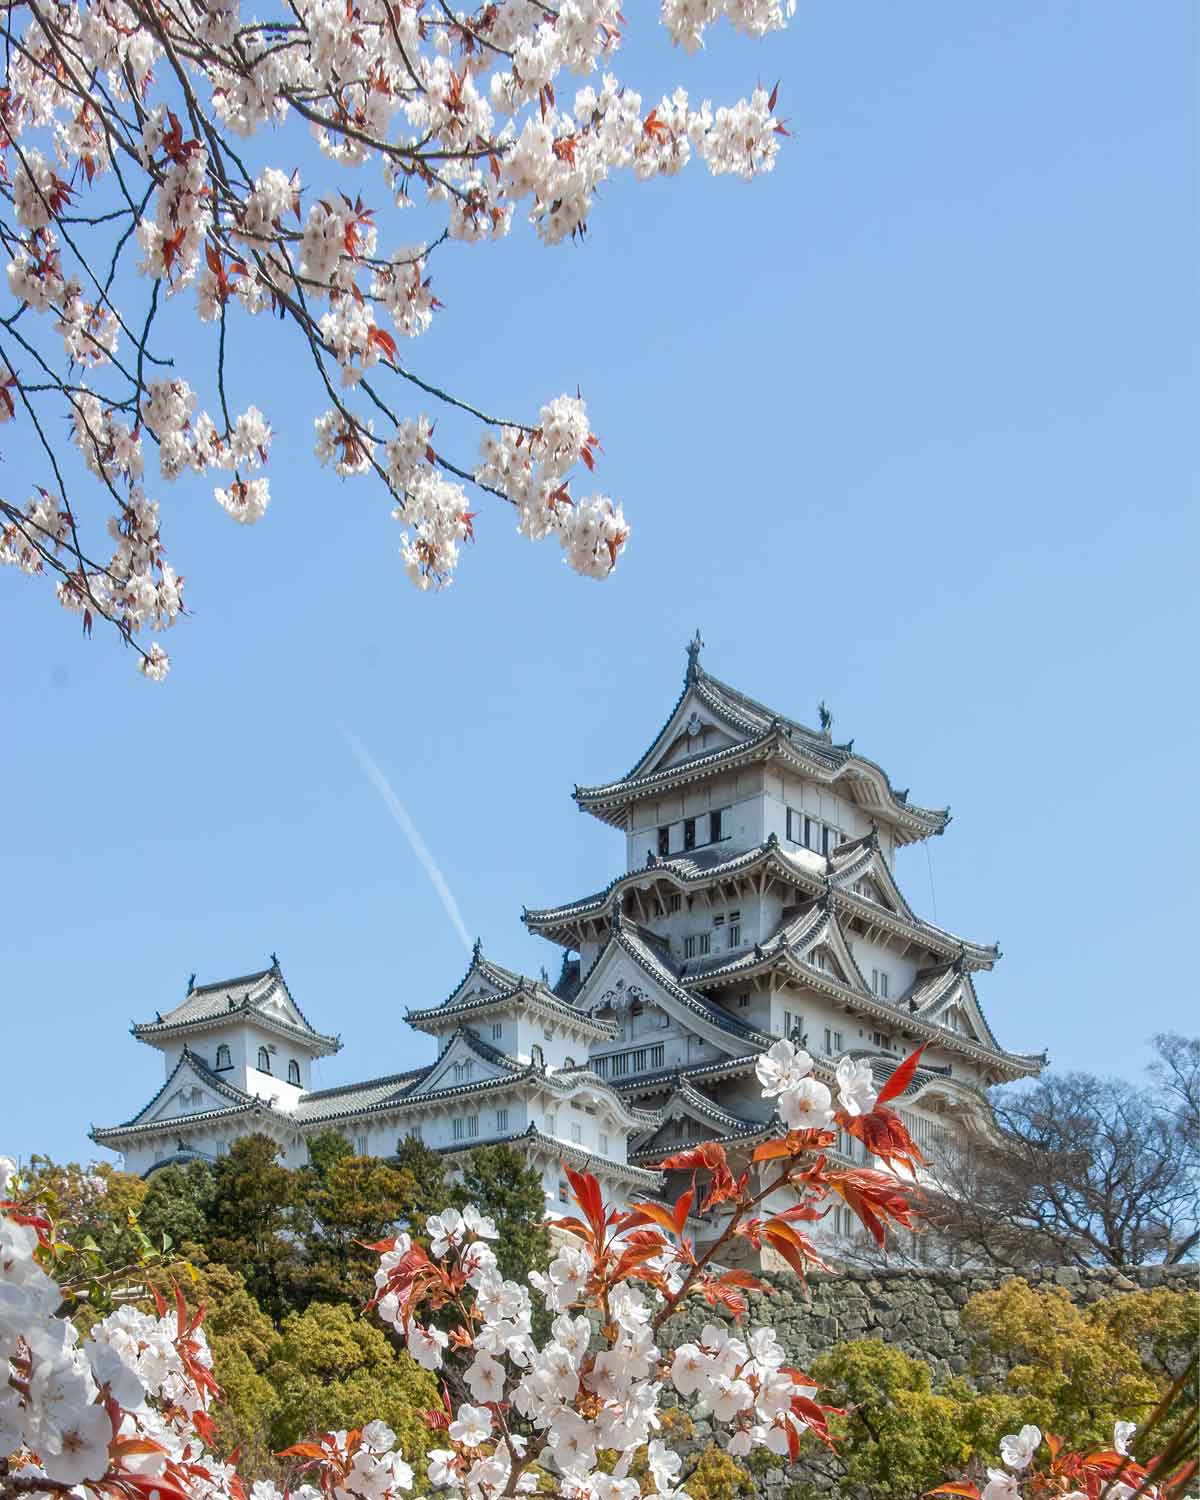 Himeji Castle with cherry blossom